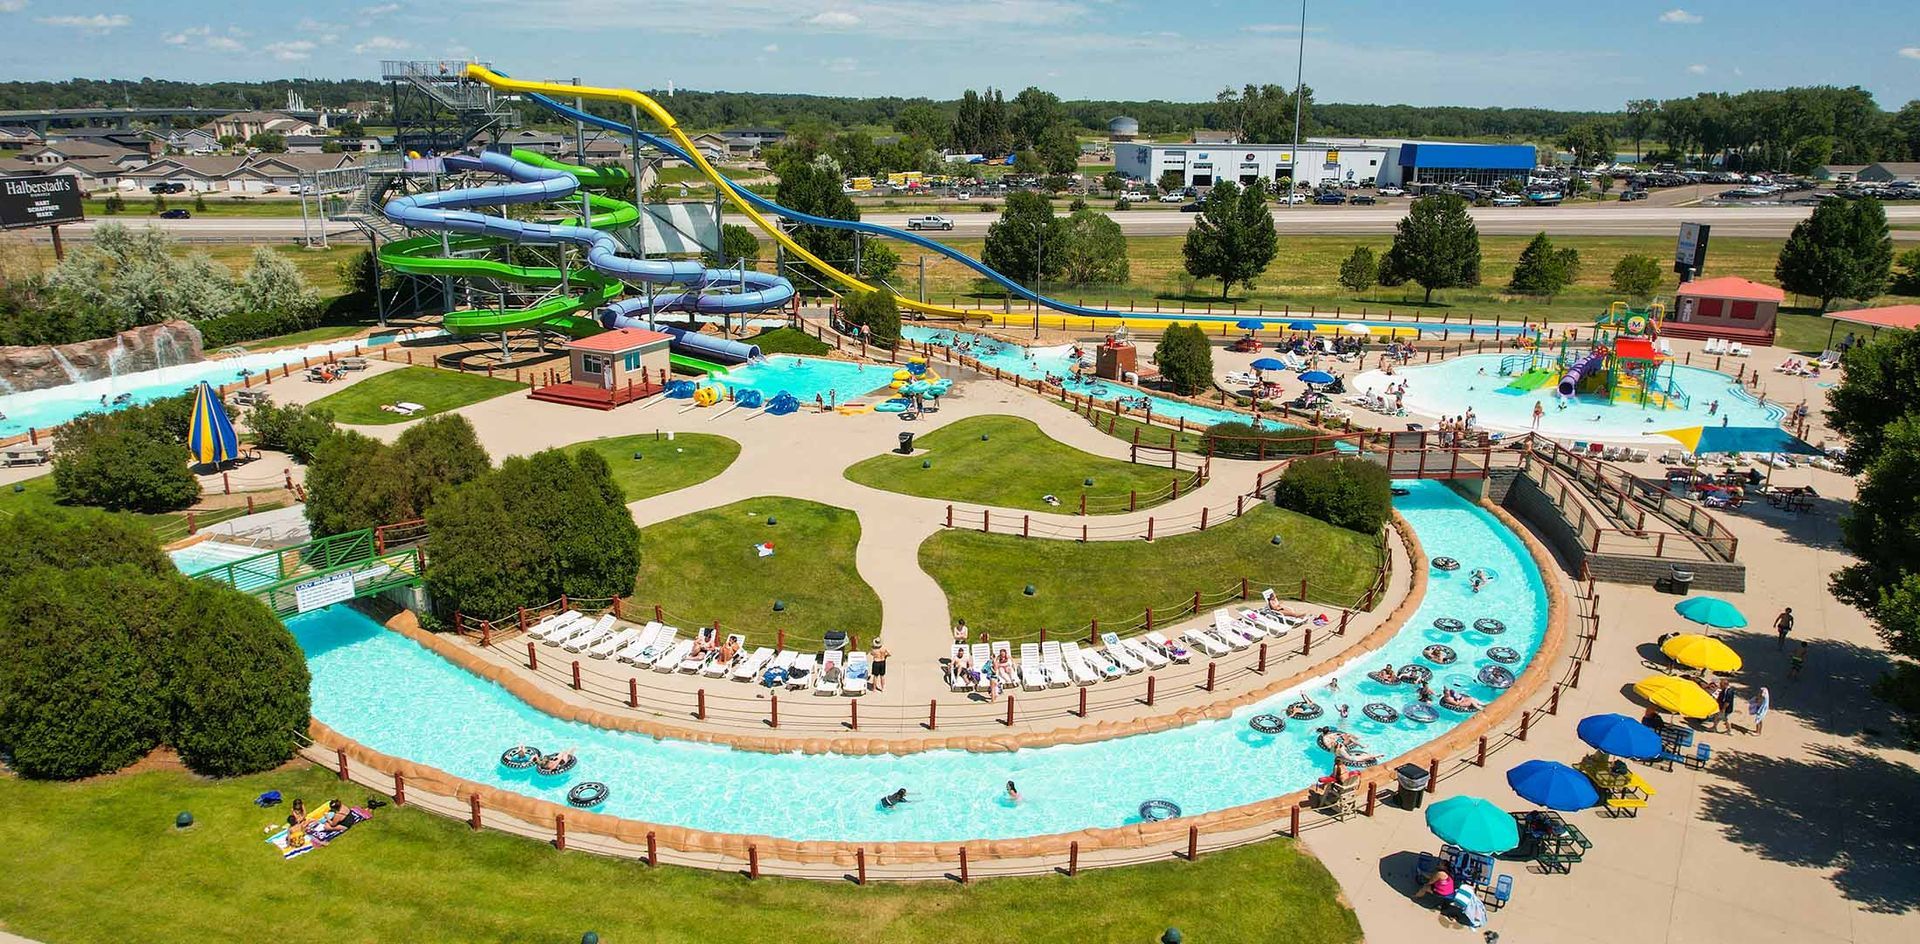 An aerial view of a water park with a river and a water slide.